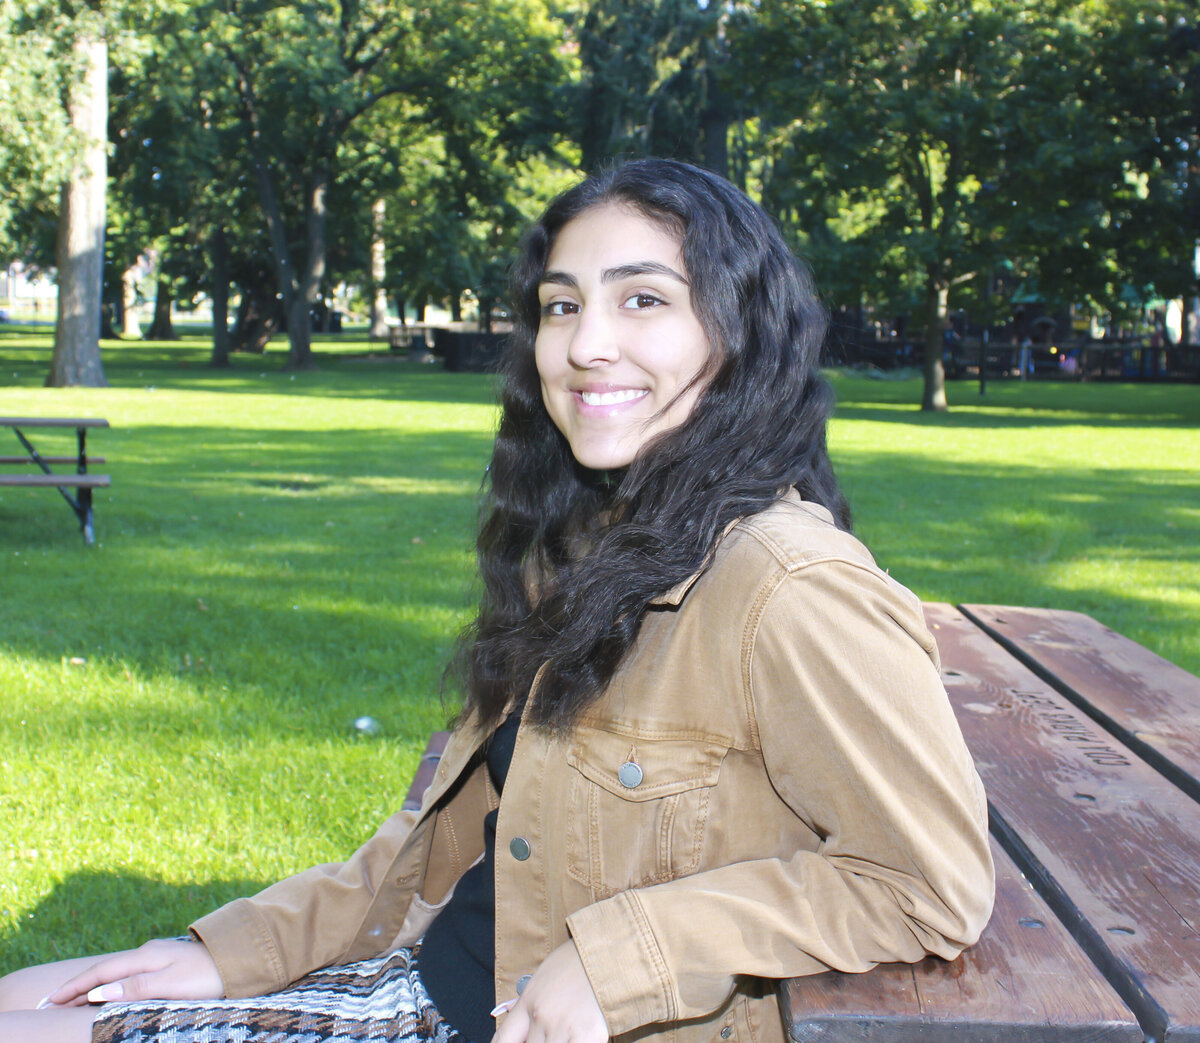 young lady sitting on bench at a park smiling